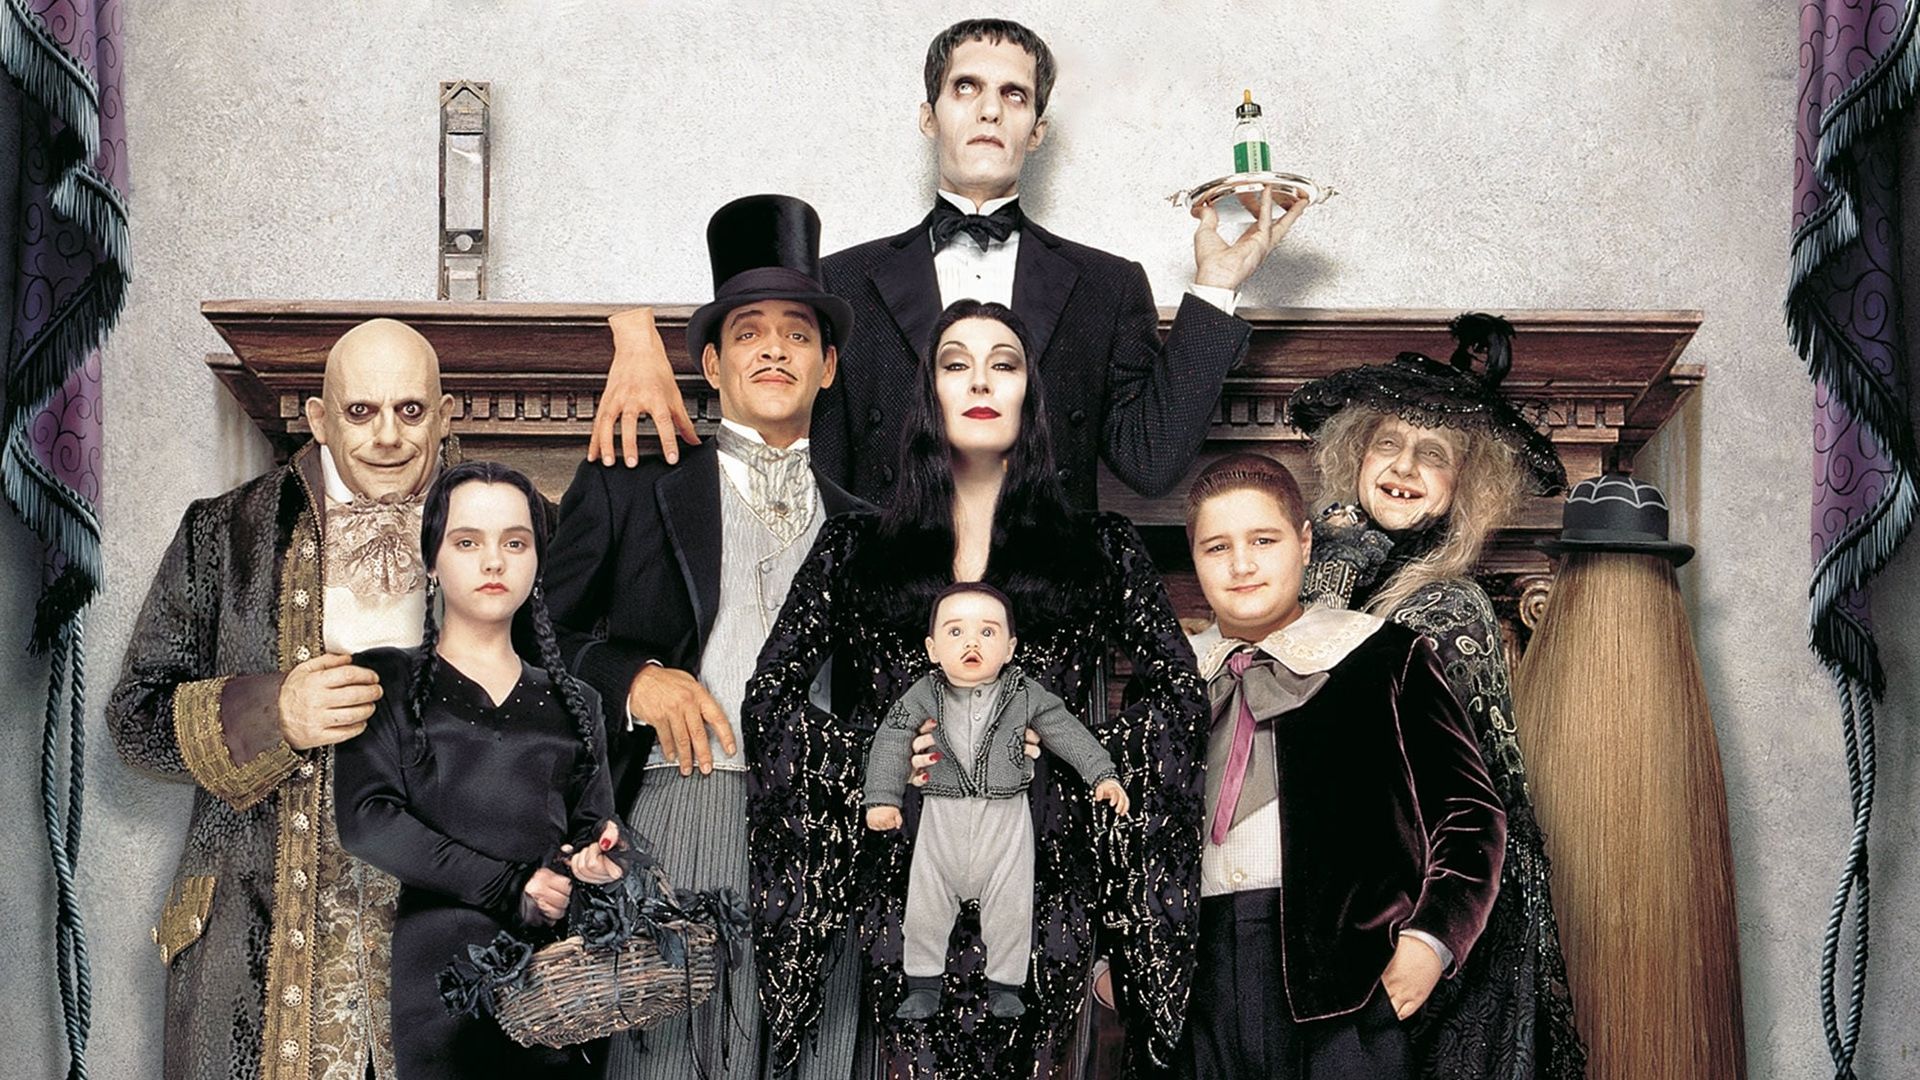 Addams Family Values background